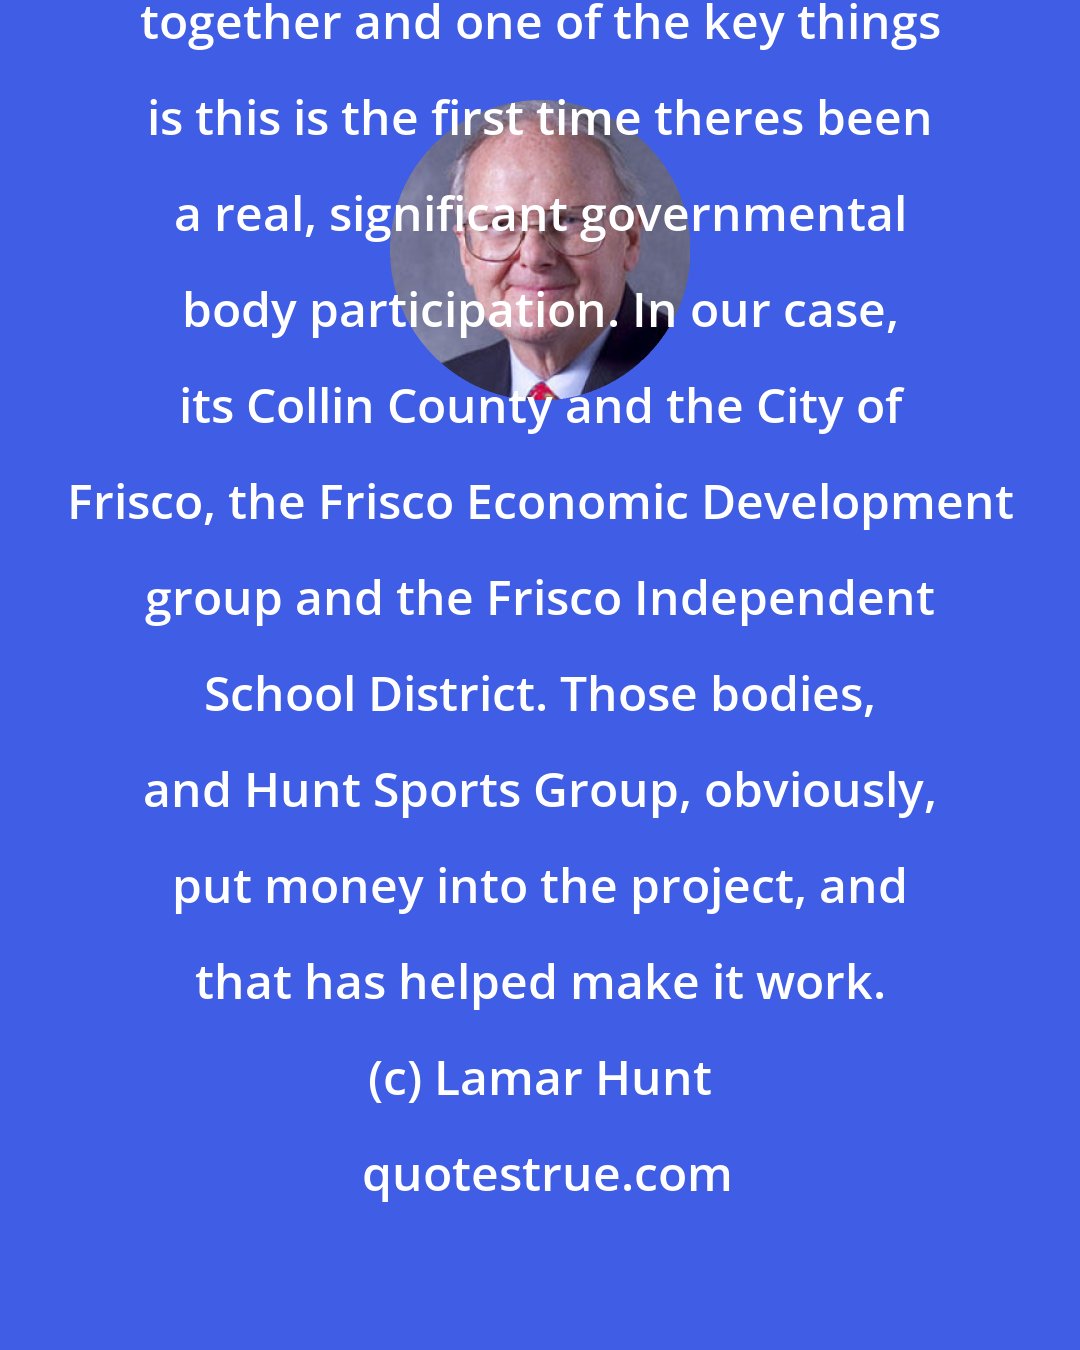 Lamar Hunt: It isnt easy to put all of the ingredients together and one of the key things is this is the first time theres been a real, significant governmental body participation. In our case, its Collin County and the City of Frisco, the Frisco Economic Development group and the Frisco Independent School District. Those bodies, and Hunt Sports Group, obviously, put money into the project, and that has helped make it work.